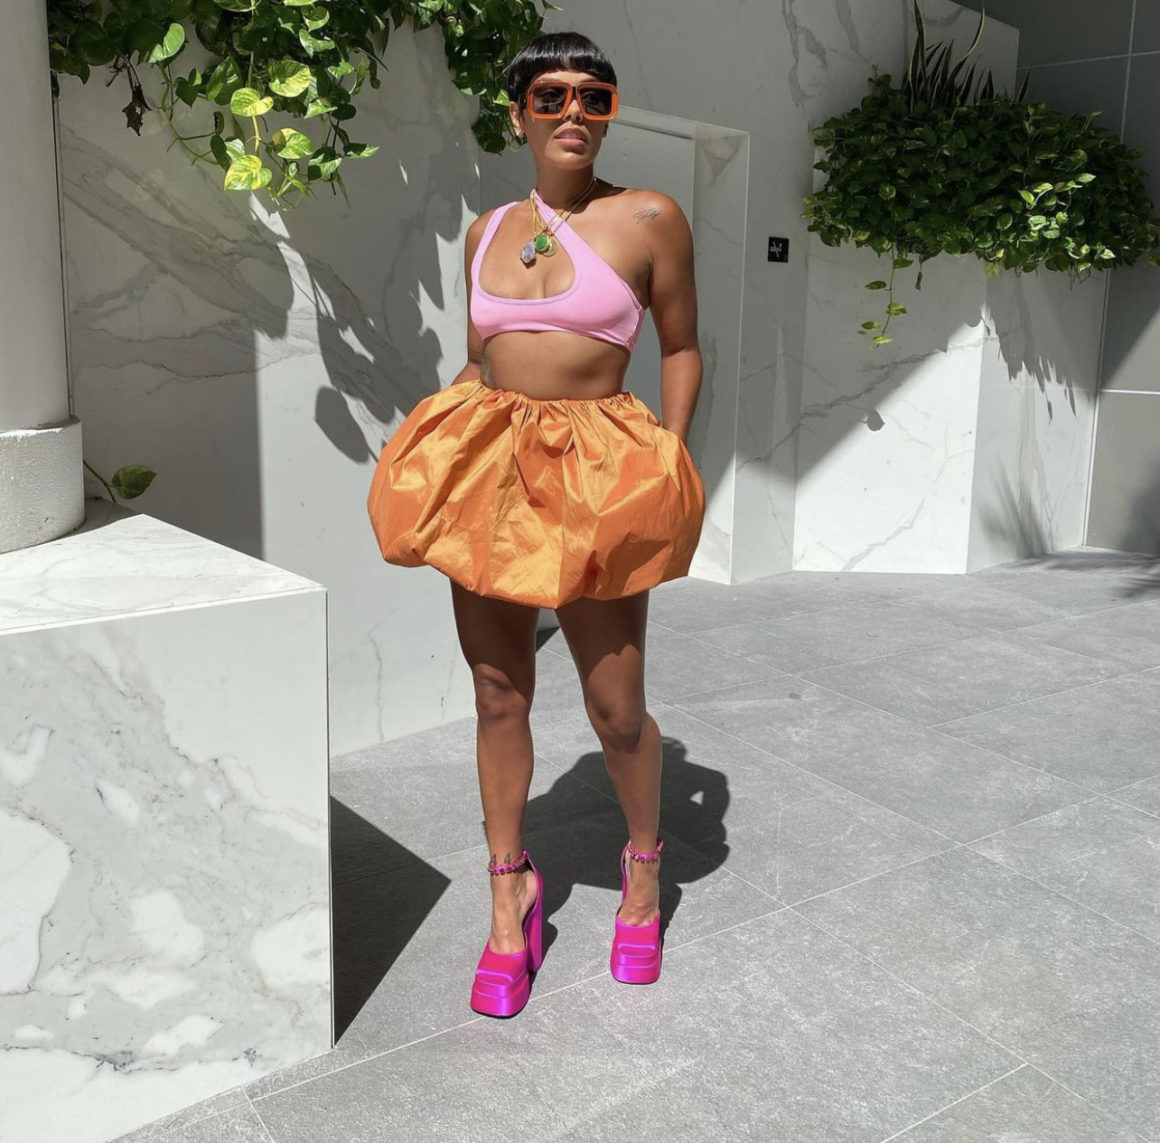 2021 Fabys Awards Vote For Fashion Bombshell of The Year Featuring Zamar Lewis from New York Arraya from Florida Kahlana Barfield Brown and More3